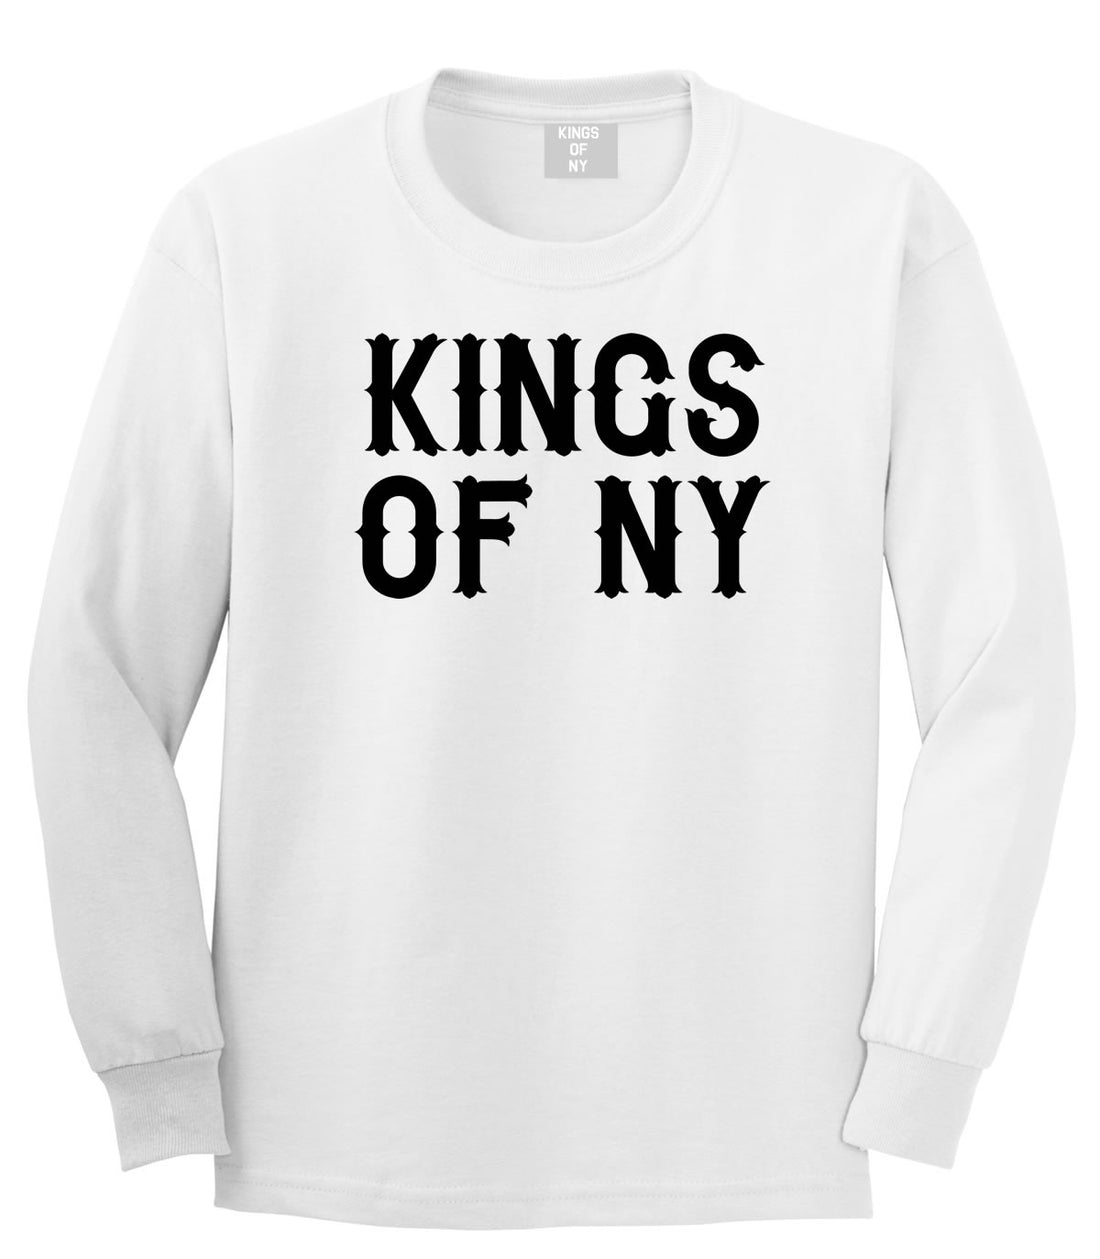 FALL15 Font Logo Print Long Sleeve T-Shirt in White by Kings Of NY